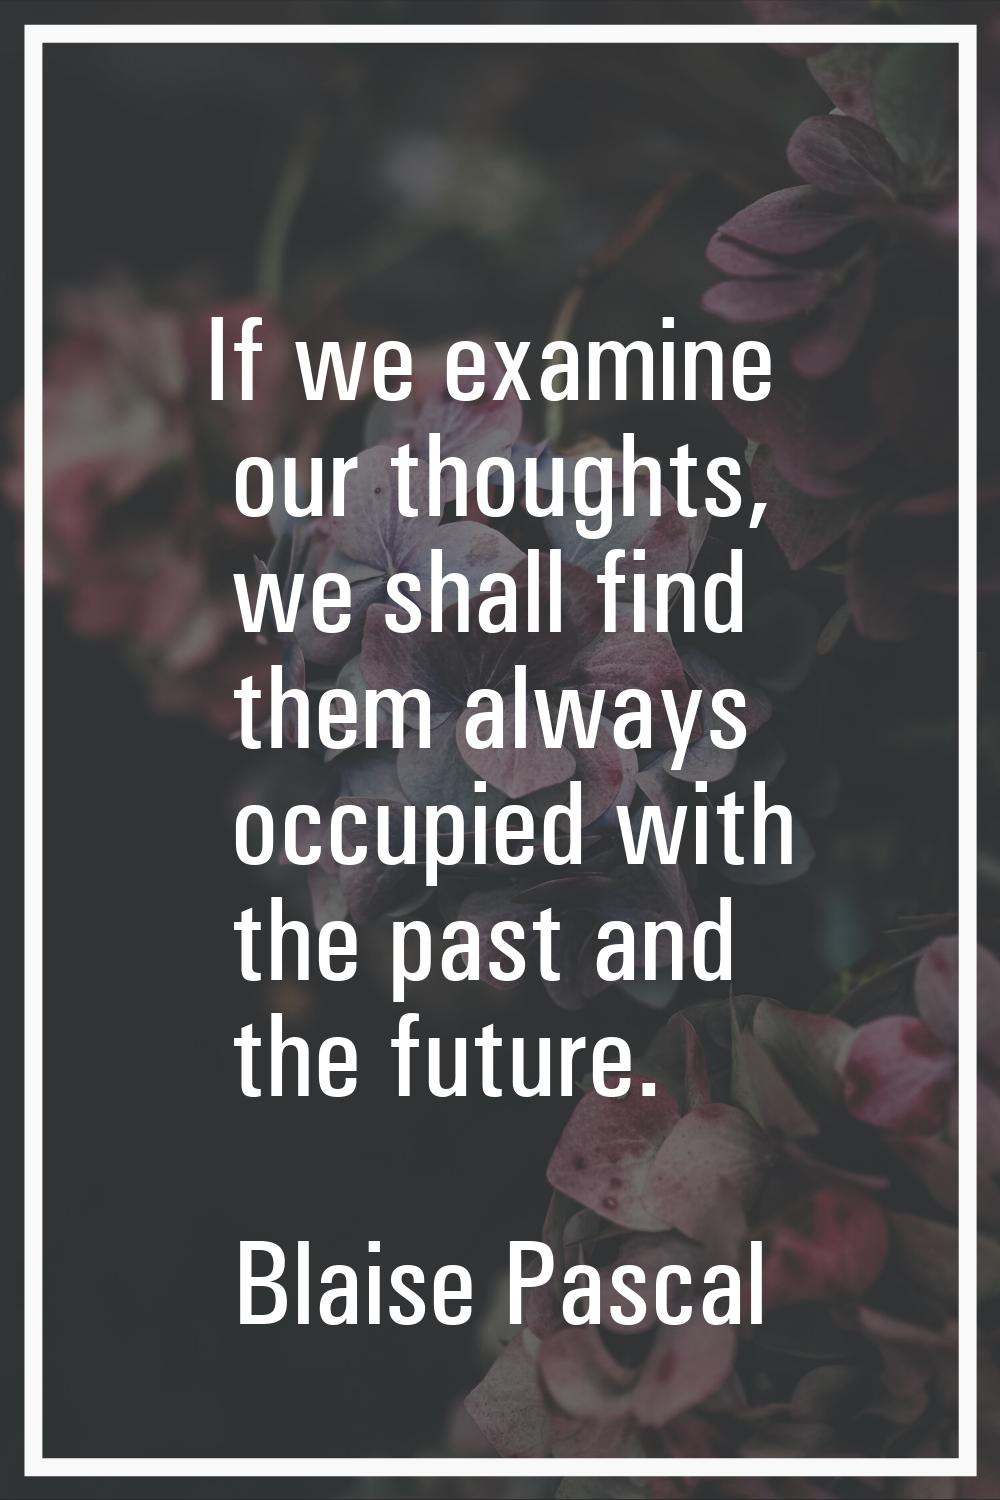 If we examine our thoughts, we shall find them always occupied with the past and the future.